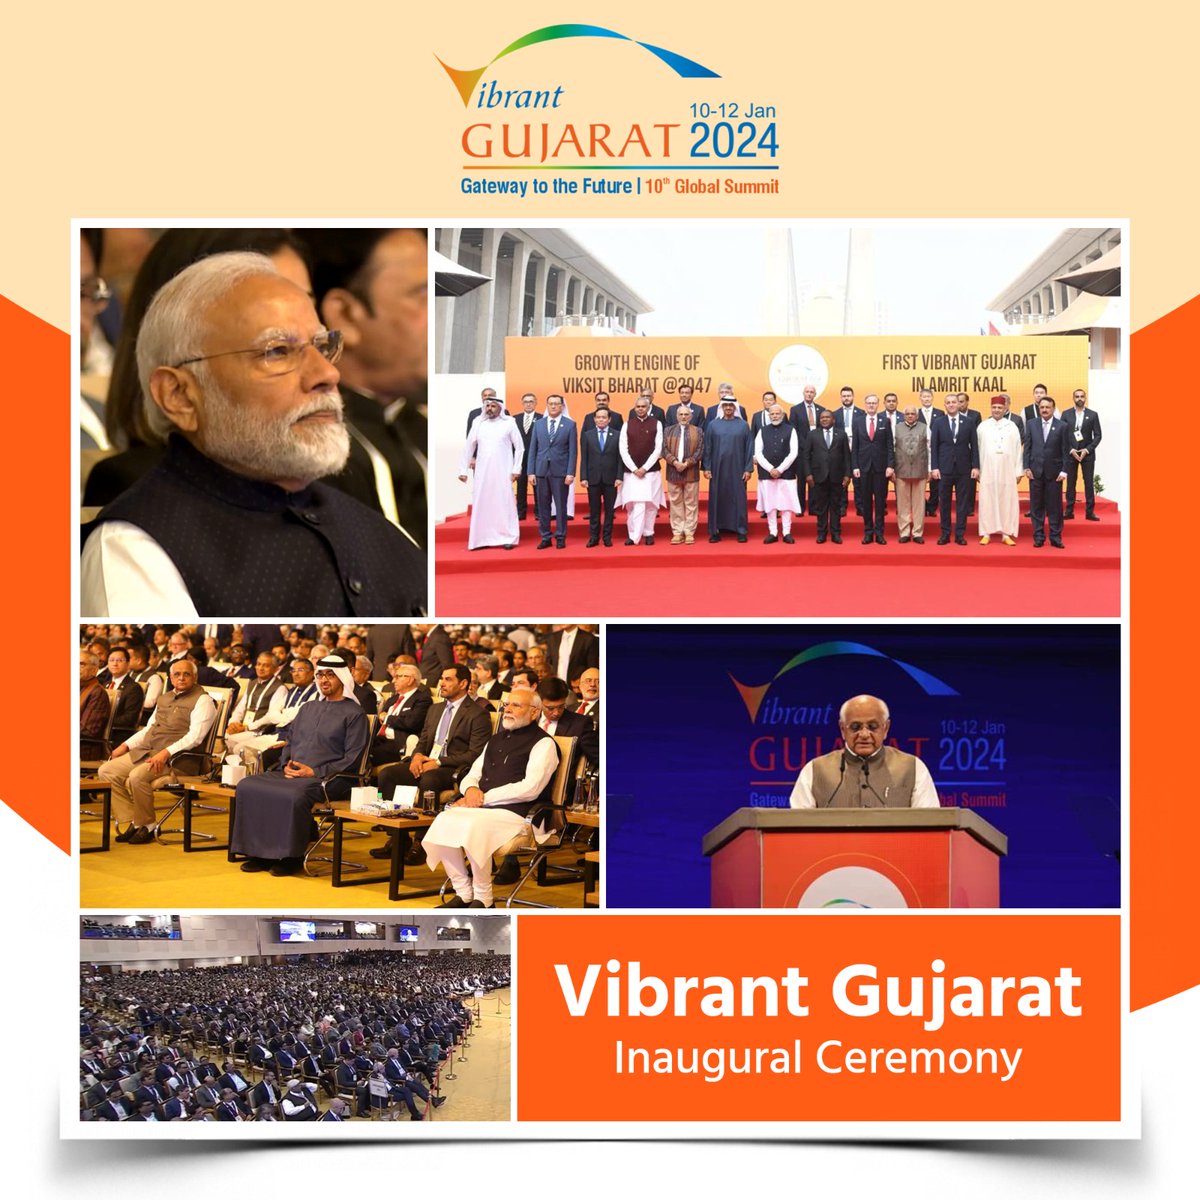 The #VibrantGujaratGlobalSummit 2024 off to a roaring start by Hon’ble PM Shri @narendramodi in the august presence of galaxy of world leaders, industry doyens and other dignitaries from across the world. #VGGS2024